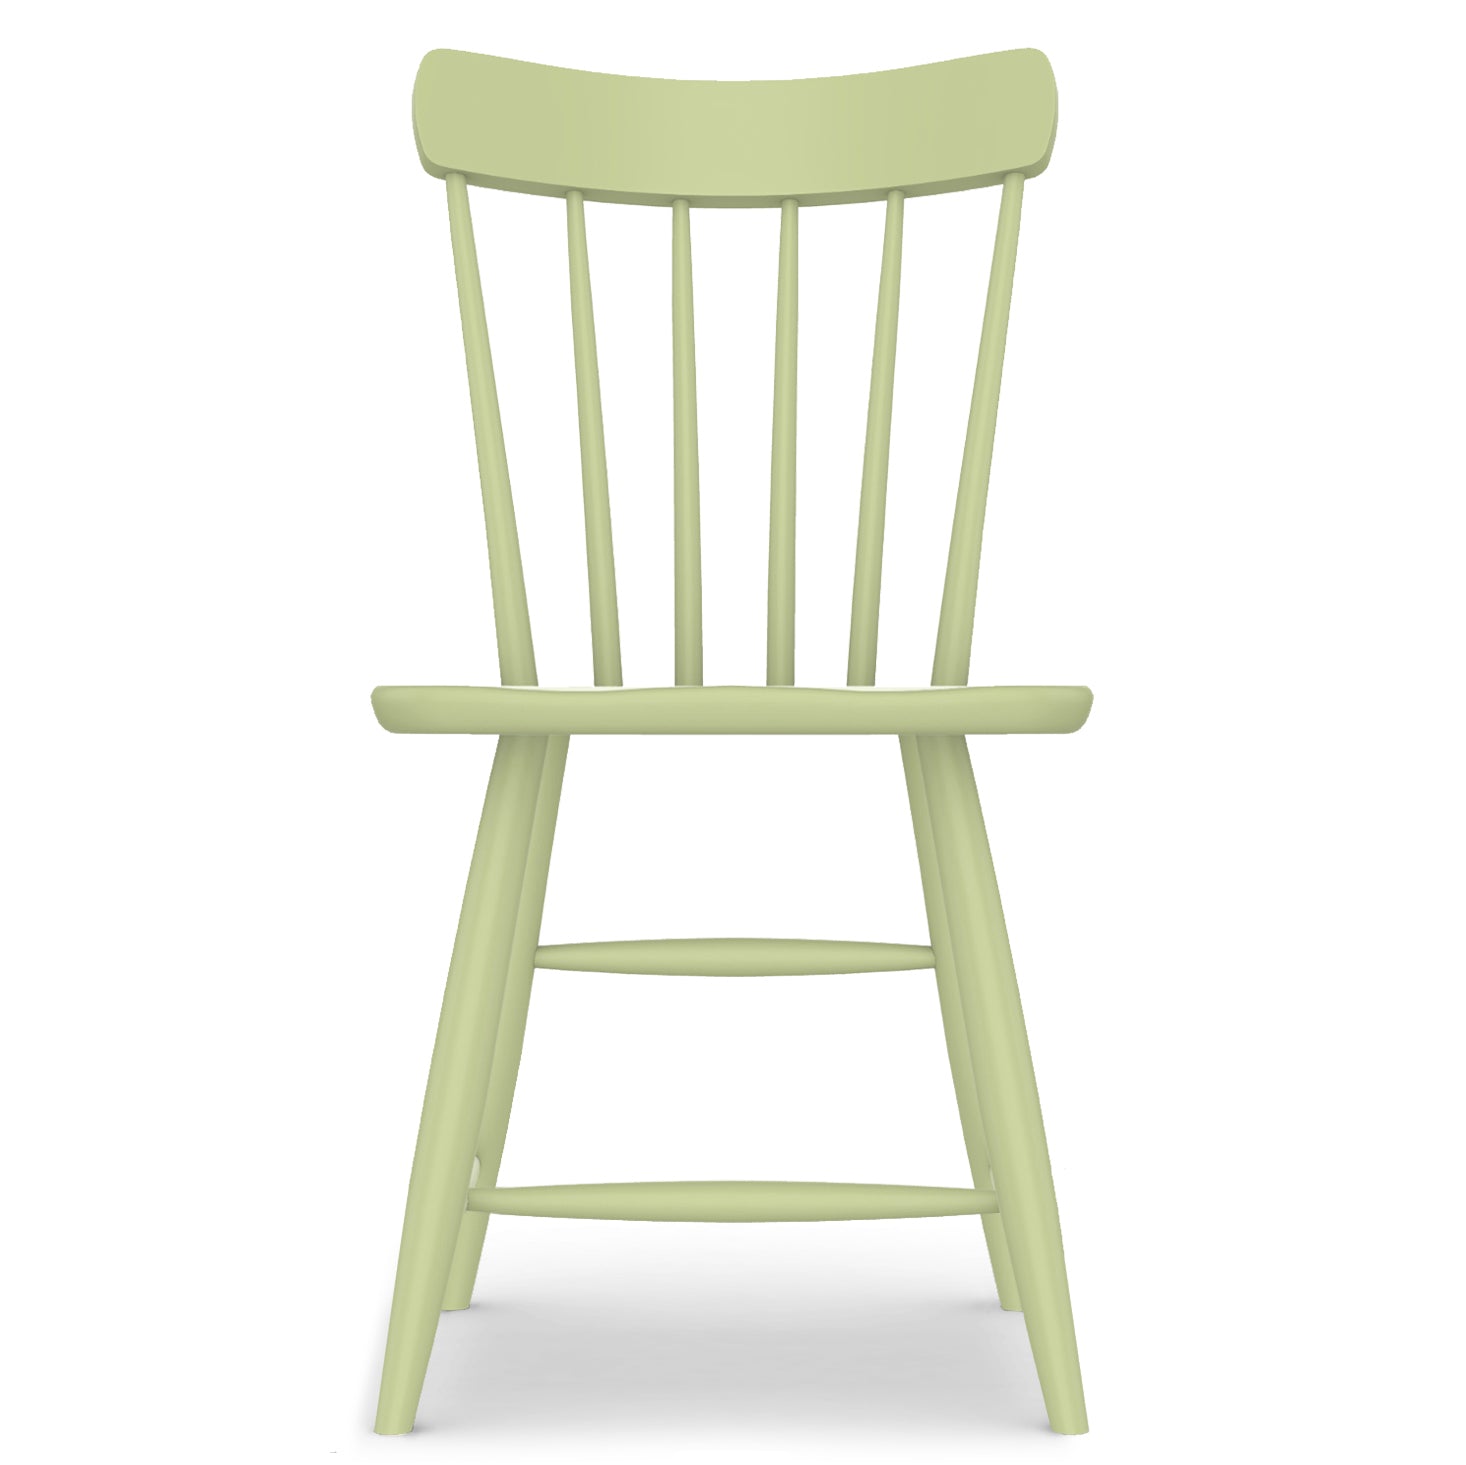 Maine Cottage Boothbay Dining Chair | Handcrafted Wooden Painted Dining Chair 